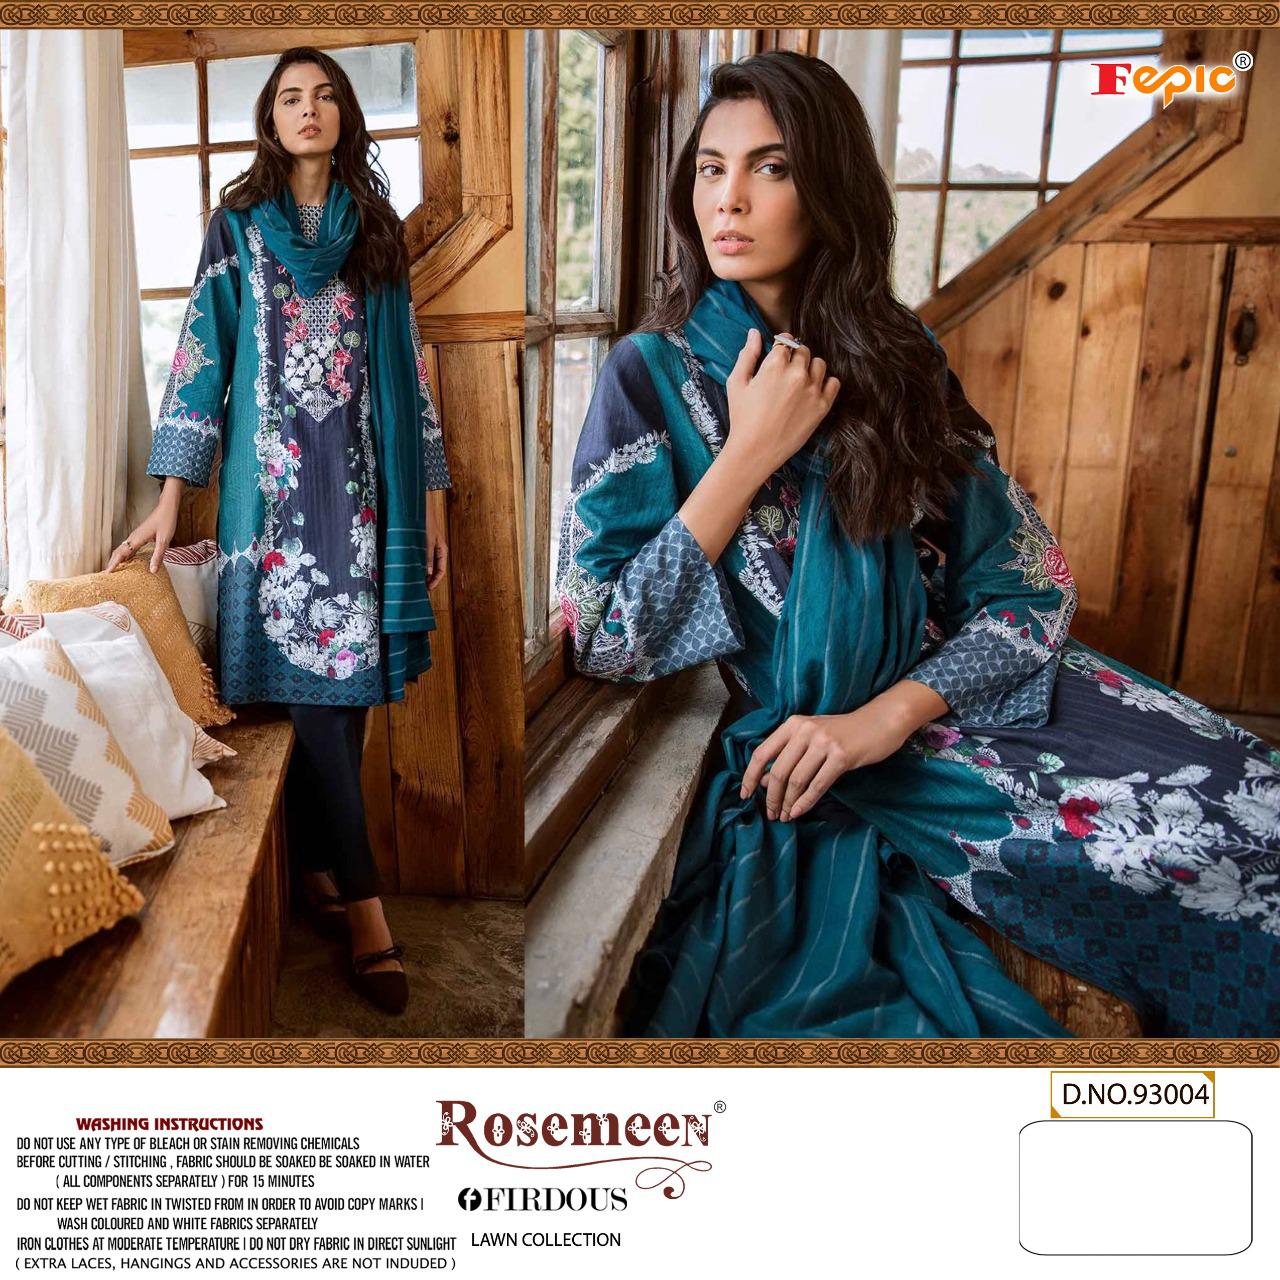 Fepic Rosemeen Firdous Lawn Collection 93004